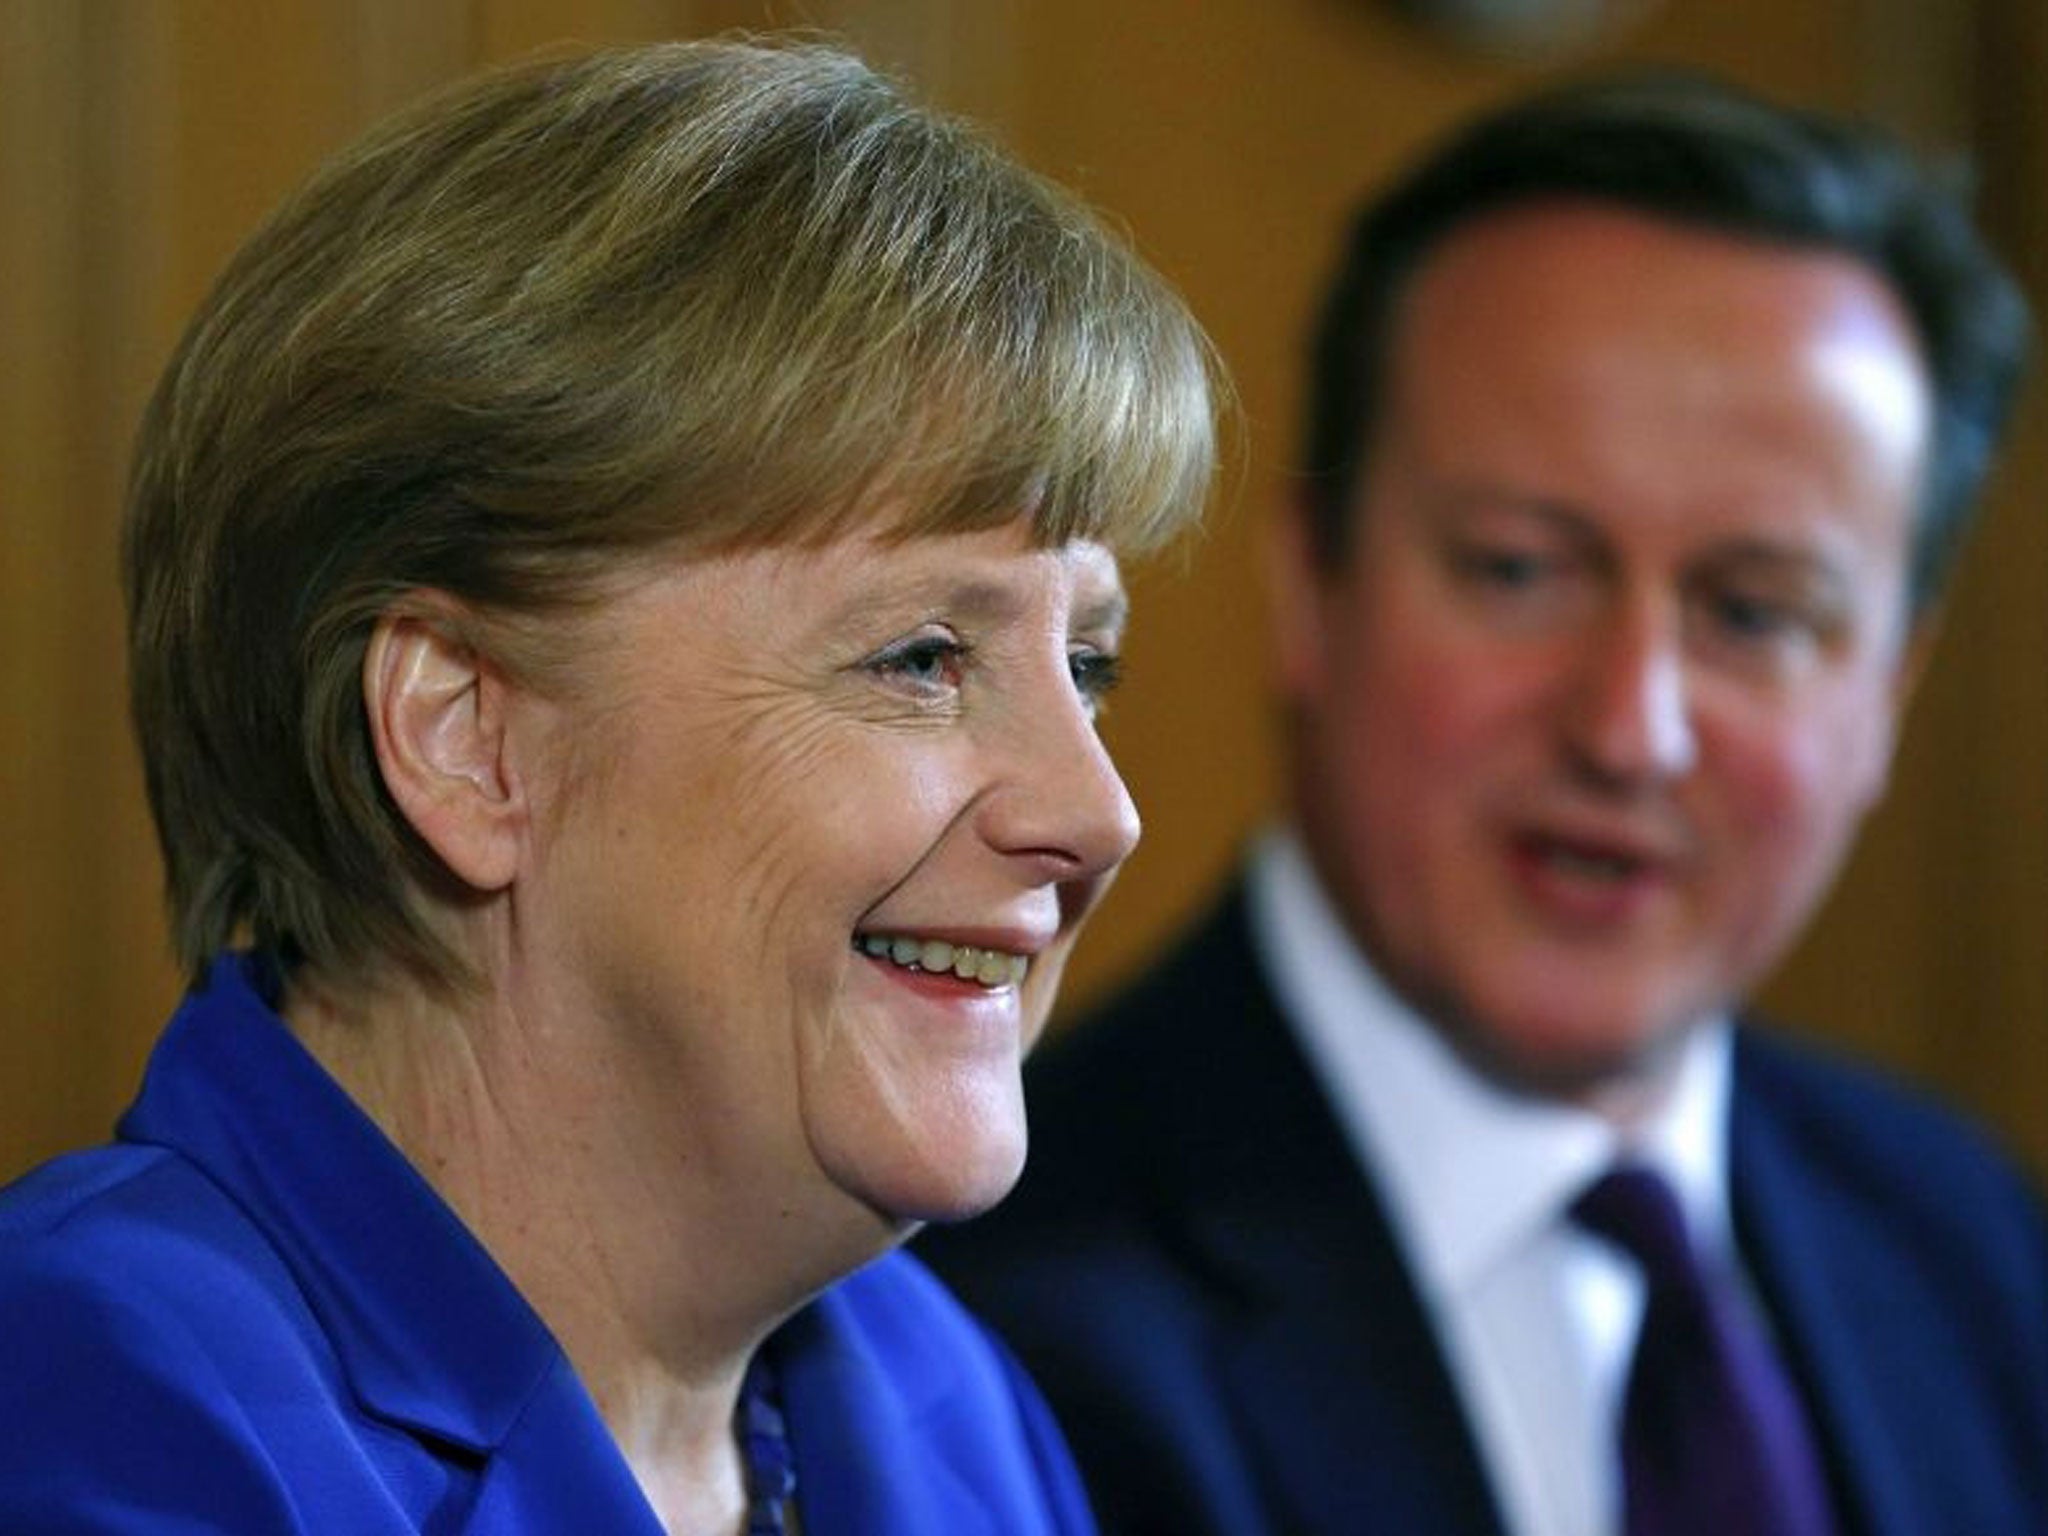 German Chancellor Angela Merkel (L) and Britain's Prime Minister David Cameron address a news conference at 10 Downing Street in London.